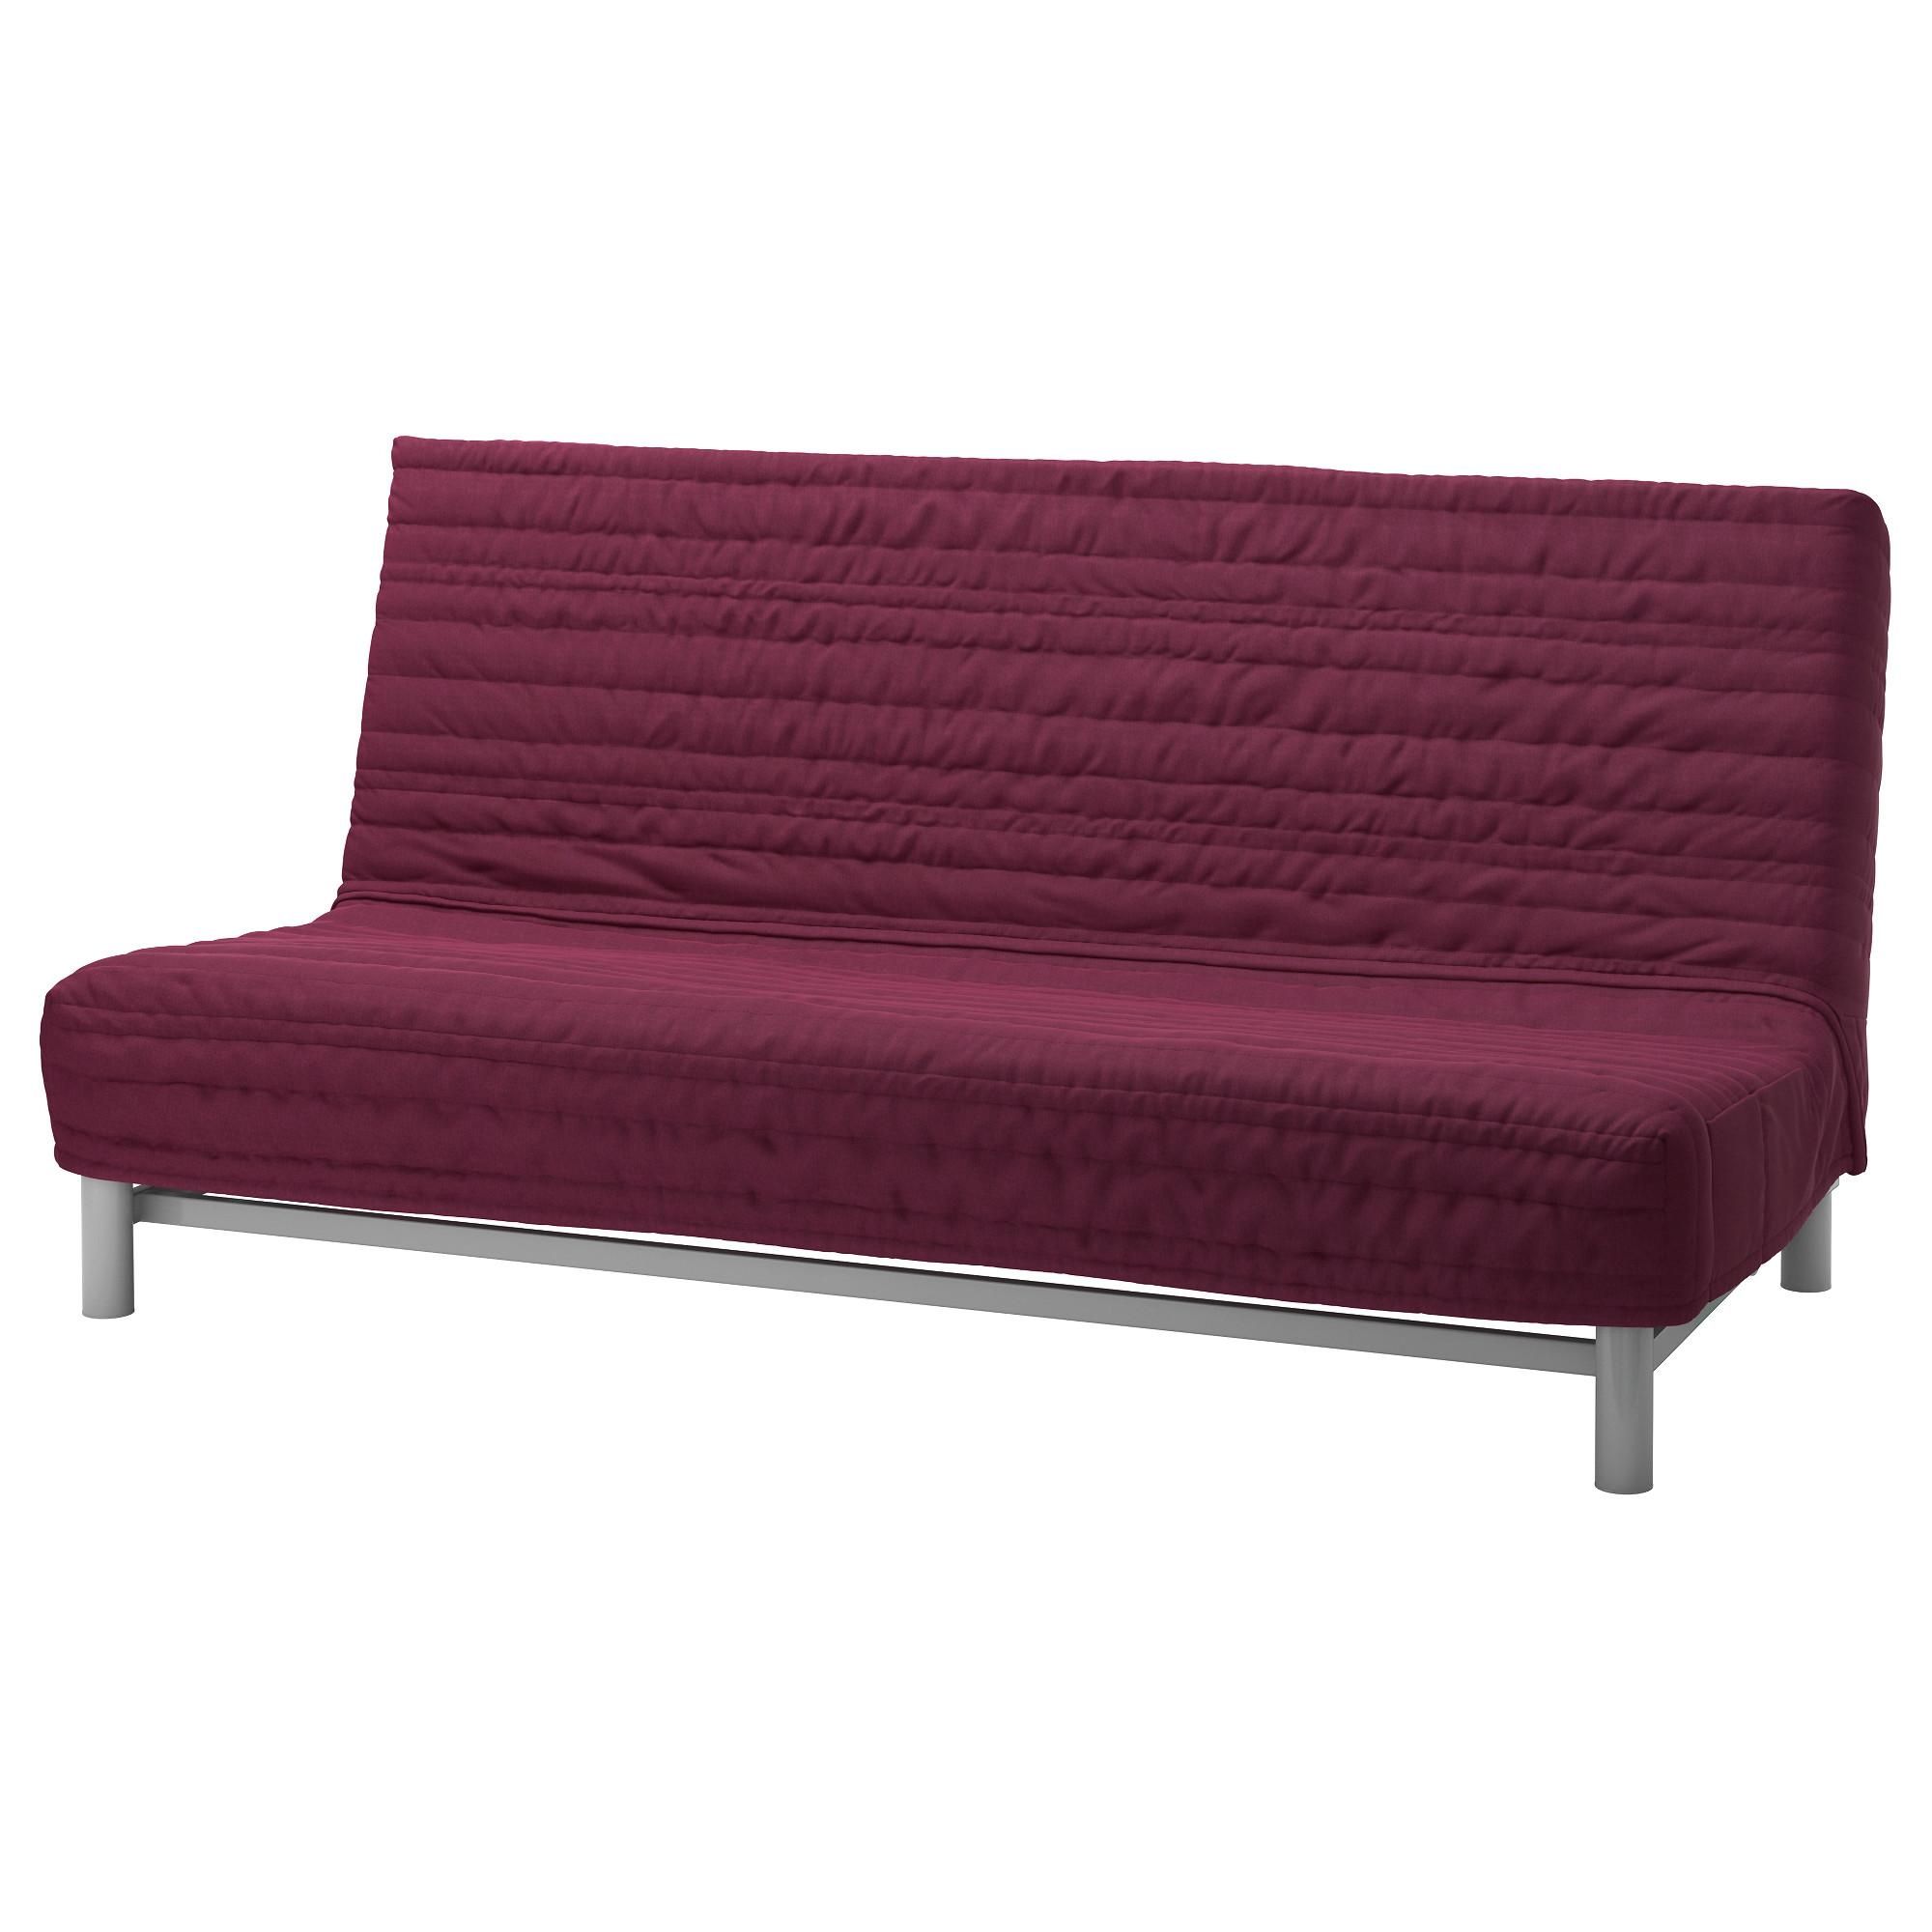 Furniture: Comfy Design Of Sears Sofa Bed For Lovely Home With Sears Sleeper Sofas (View 10 of 20)